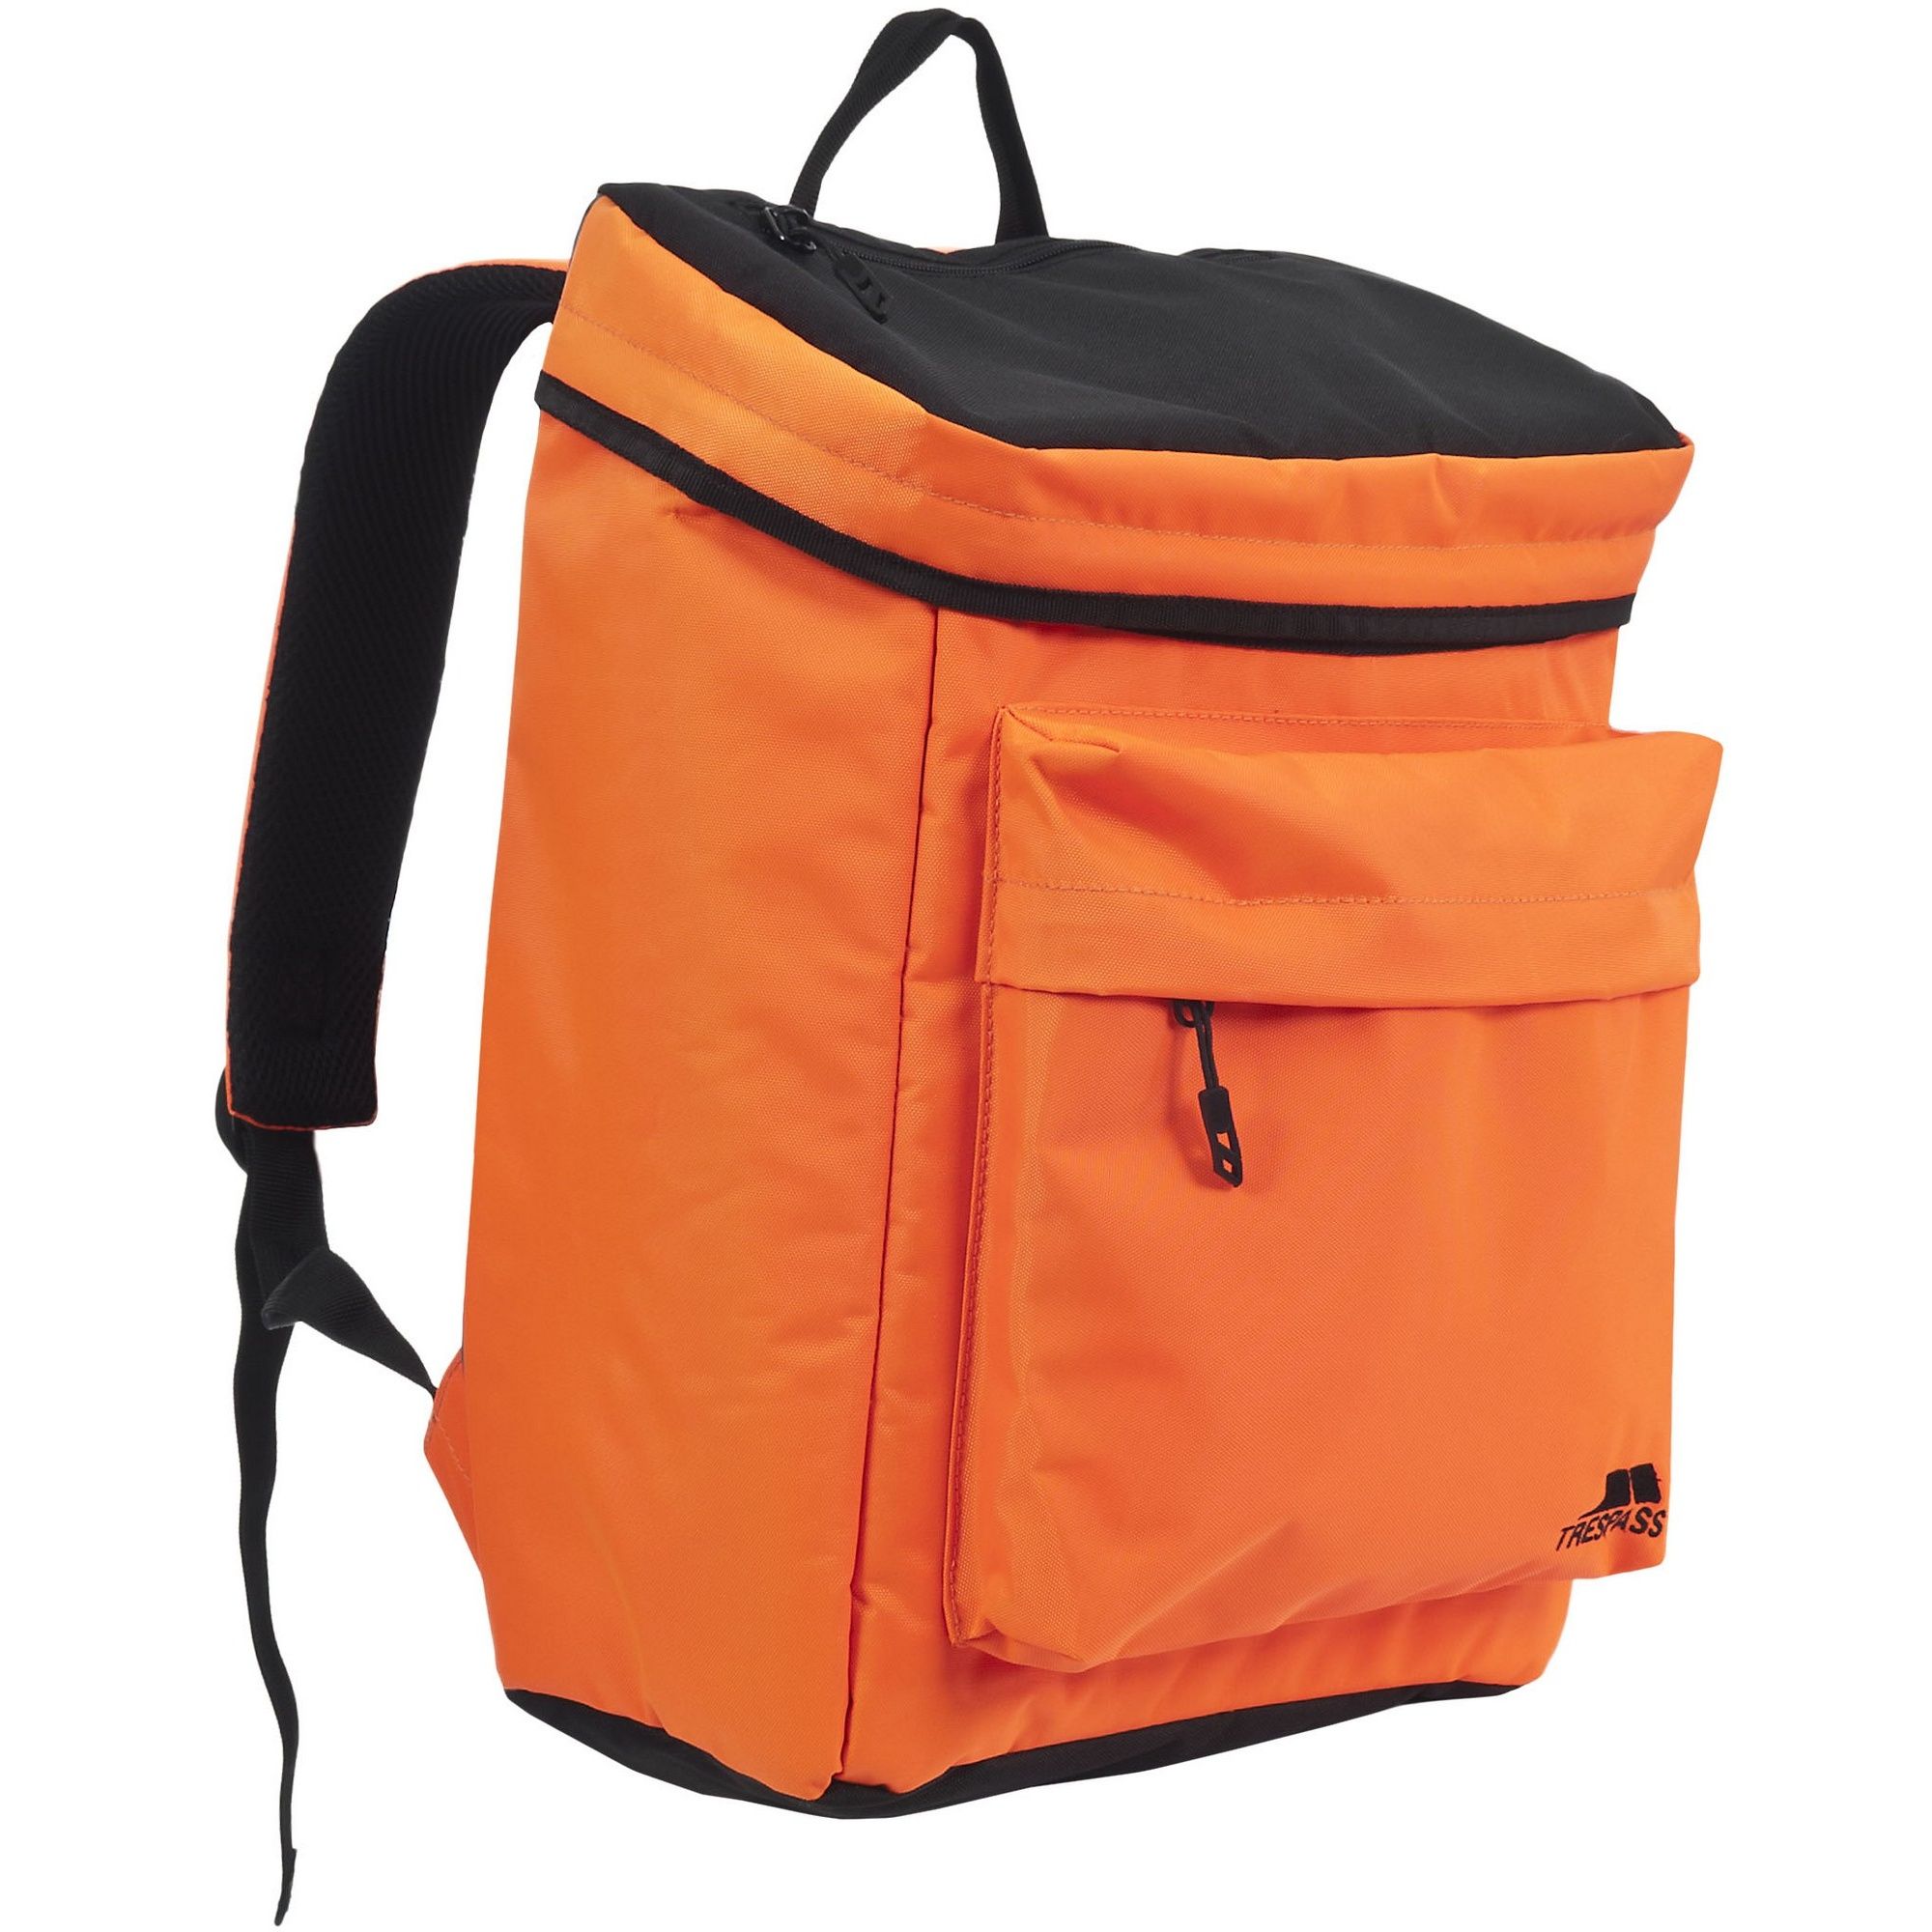 Backpack with 27 litre storage capacity. 3 zip pockets. Padded straps. Reflective piping. Fabric: outer 100% 600D polyester, lining: 210T light foam padding.